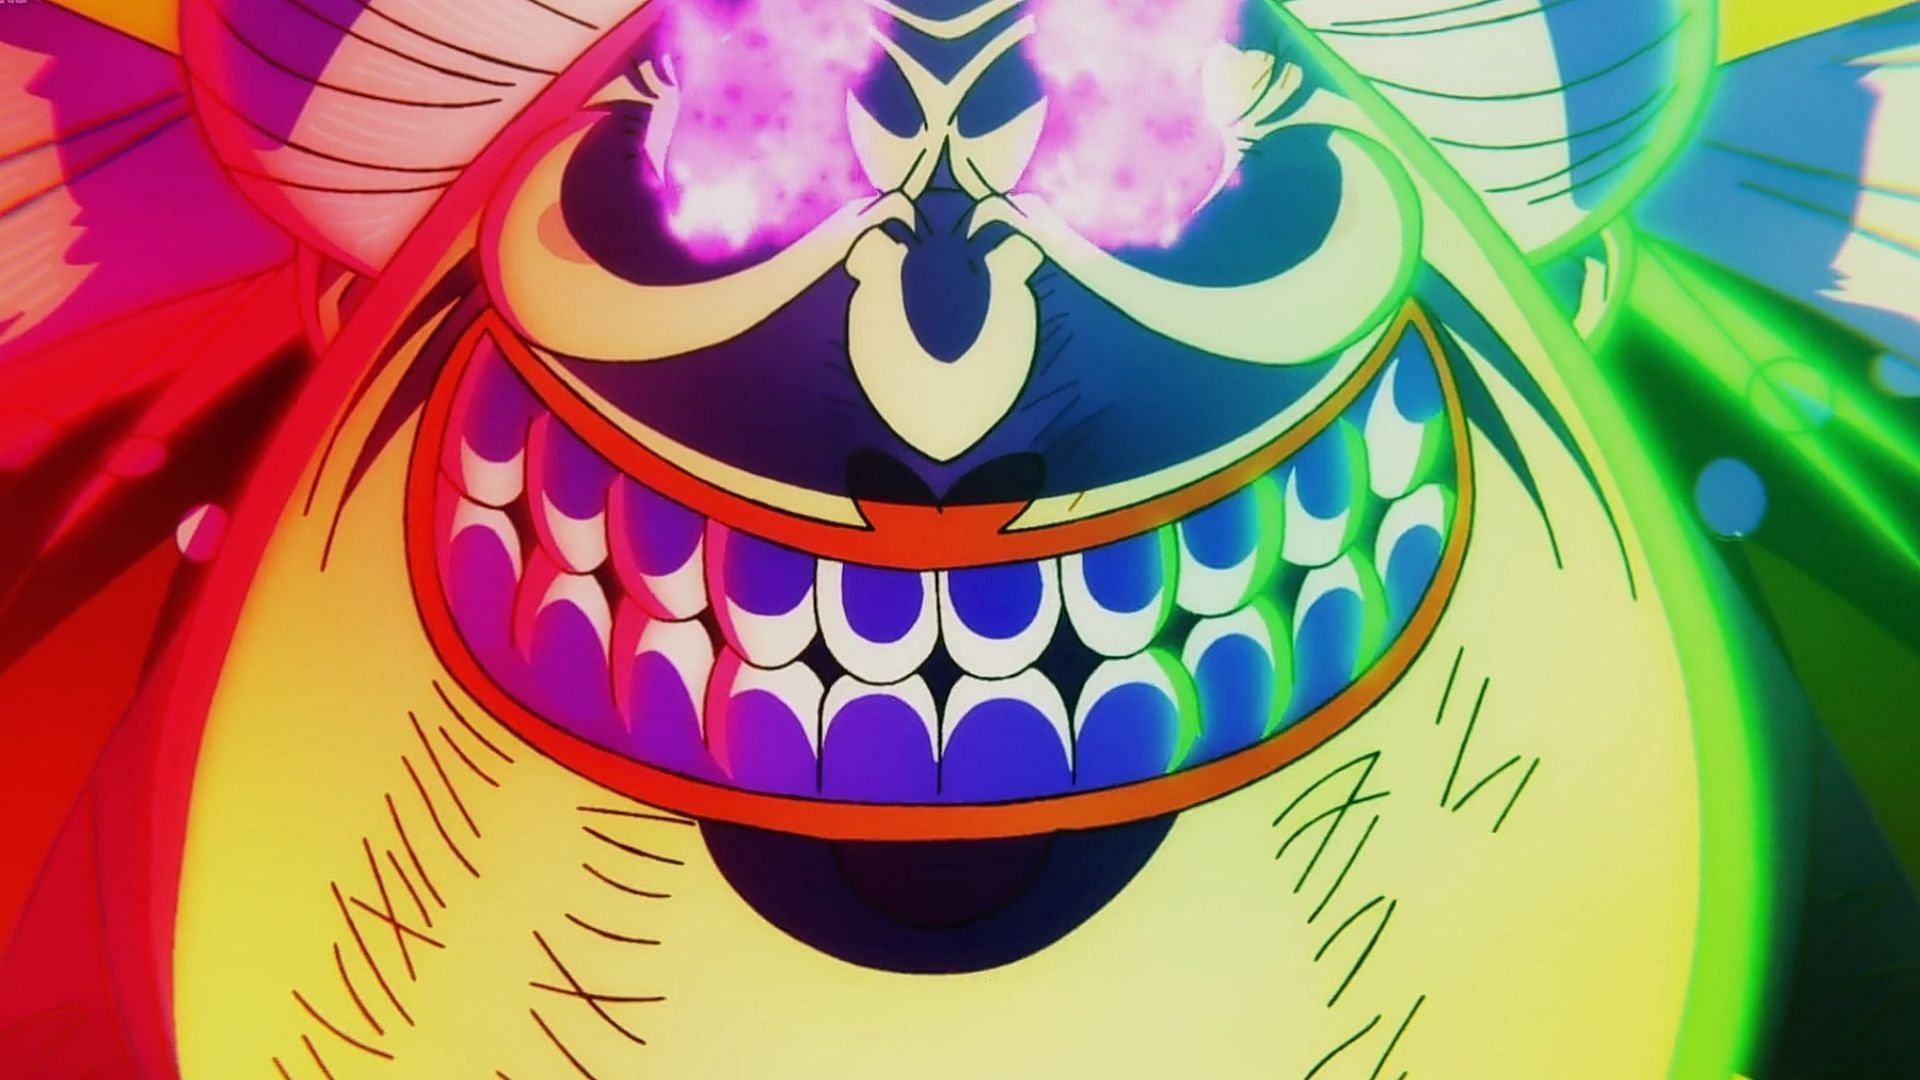 one piece side blog — ep. 1057